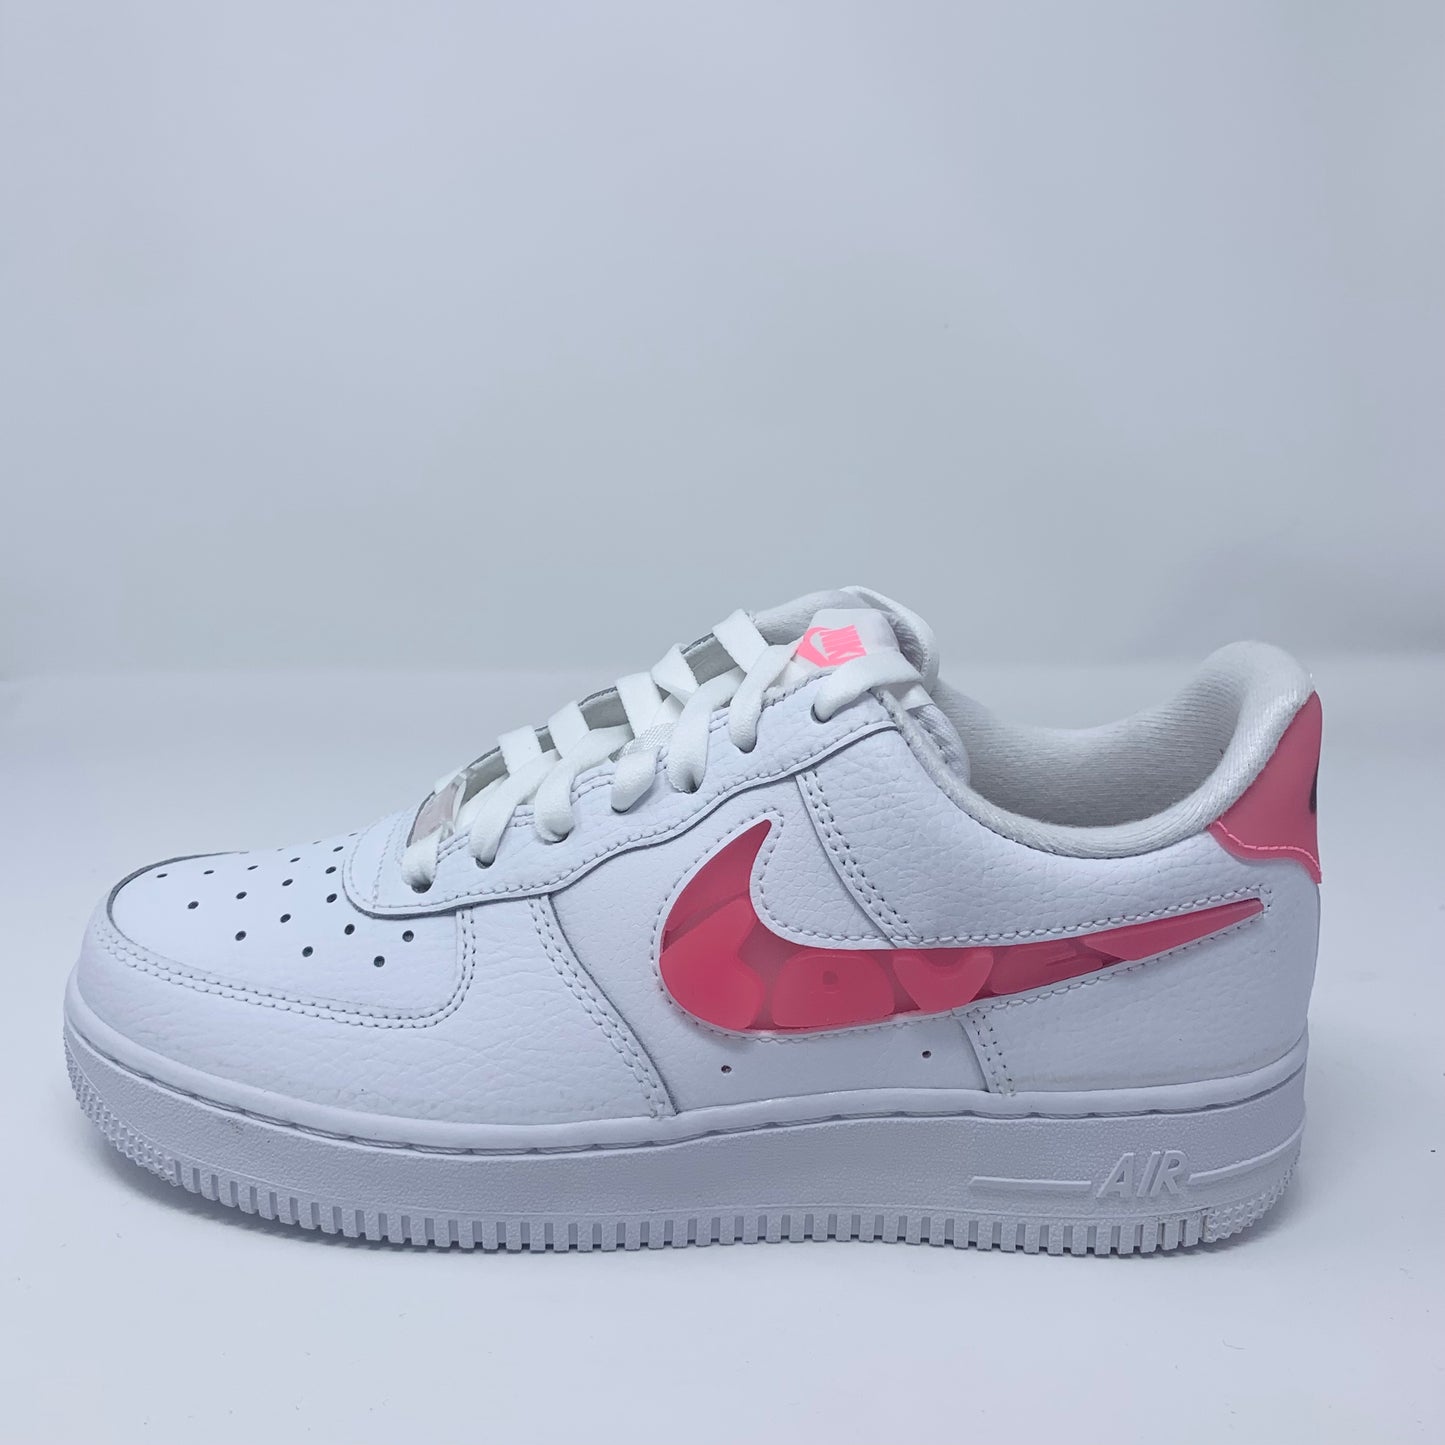 Nike Af1 "Love For All" (W)